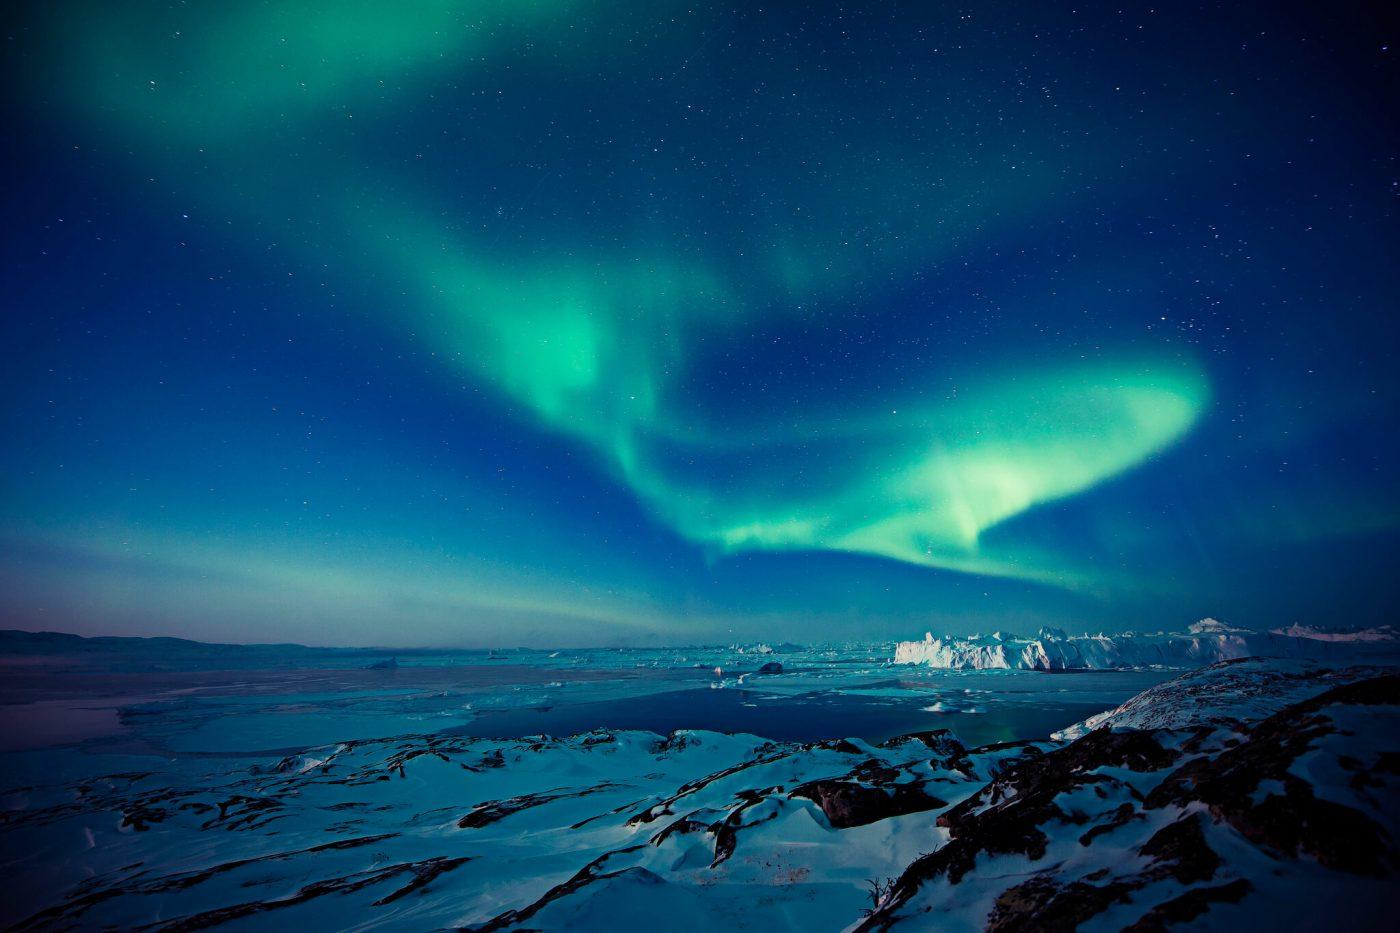 Northern lights over Ilulissat Icefjord. Photo by Andre Schoenherr